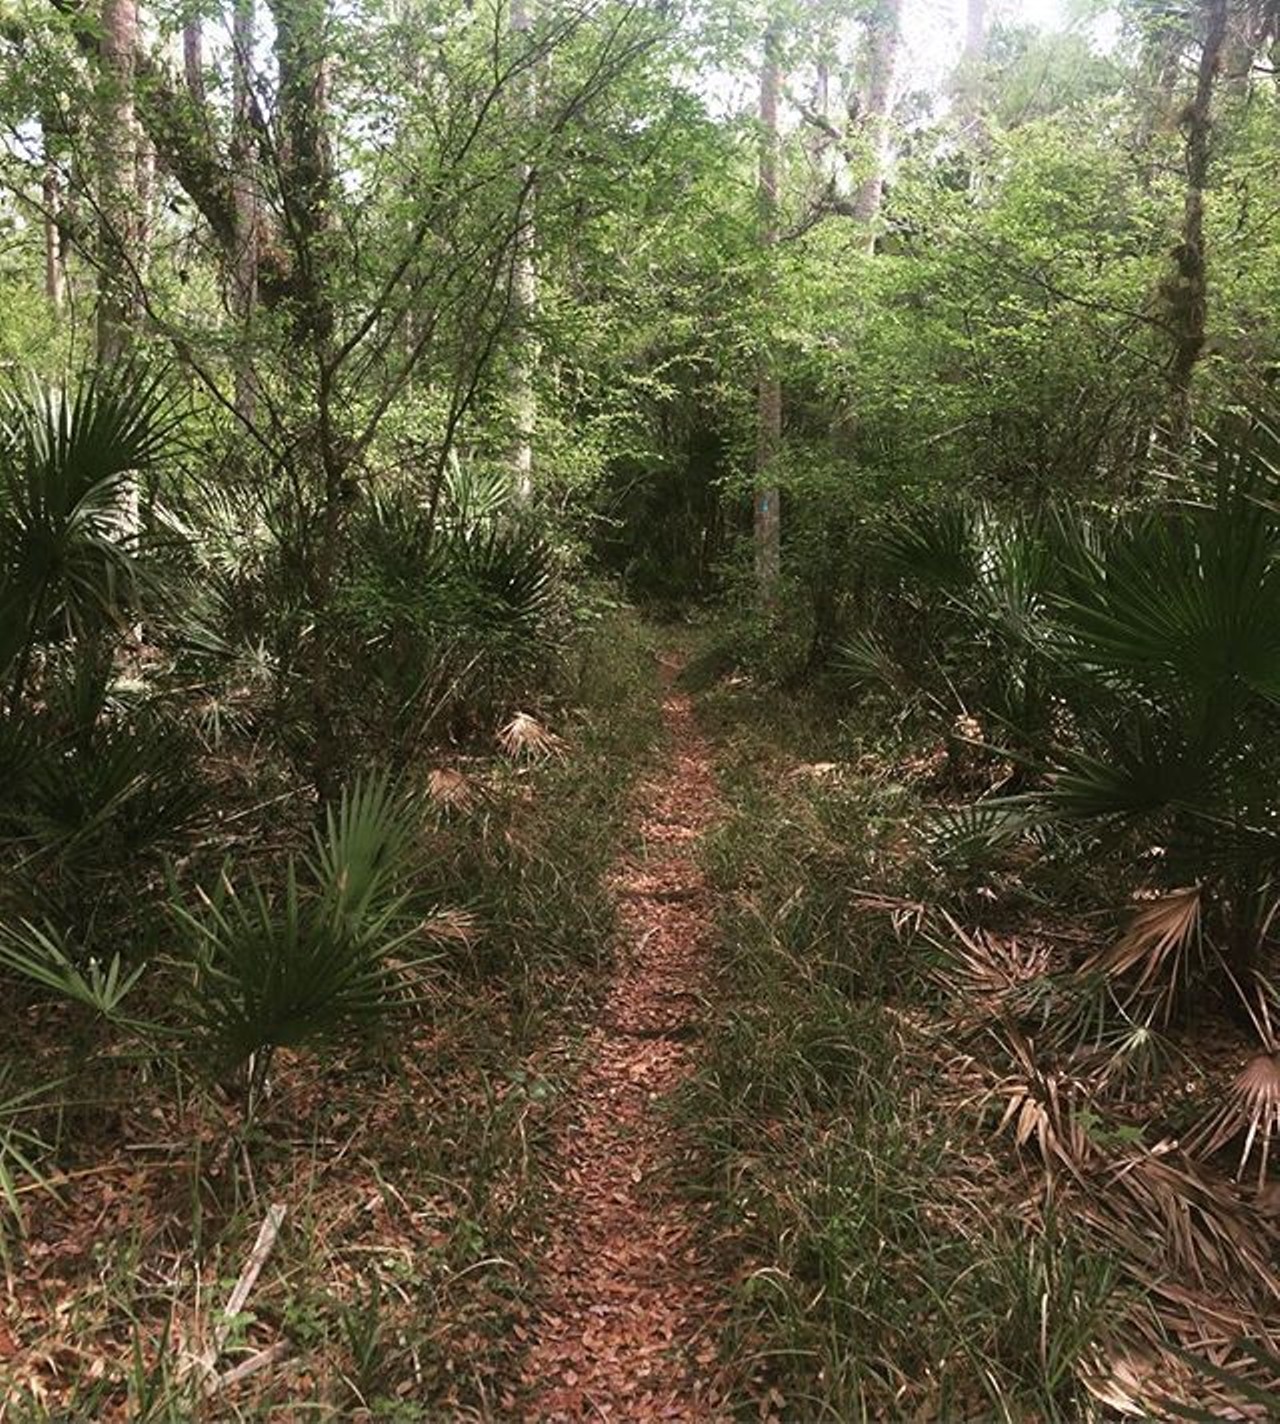 Take a scenic walk along the Tosohatchee Reserve on the Florida Trail
3365 Taylor Creek Road, Christmas
Crossing the 28,000-acre Tosohatchee Reserve, this 10-mile trail allows hikers - and even dogs - to walk through one of Florida&#146;s oldest slash pine forests. The sights you and your date will see can&#146;t be compared.
Photo via davygetbye/Instagram